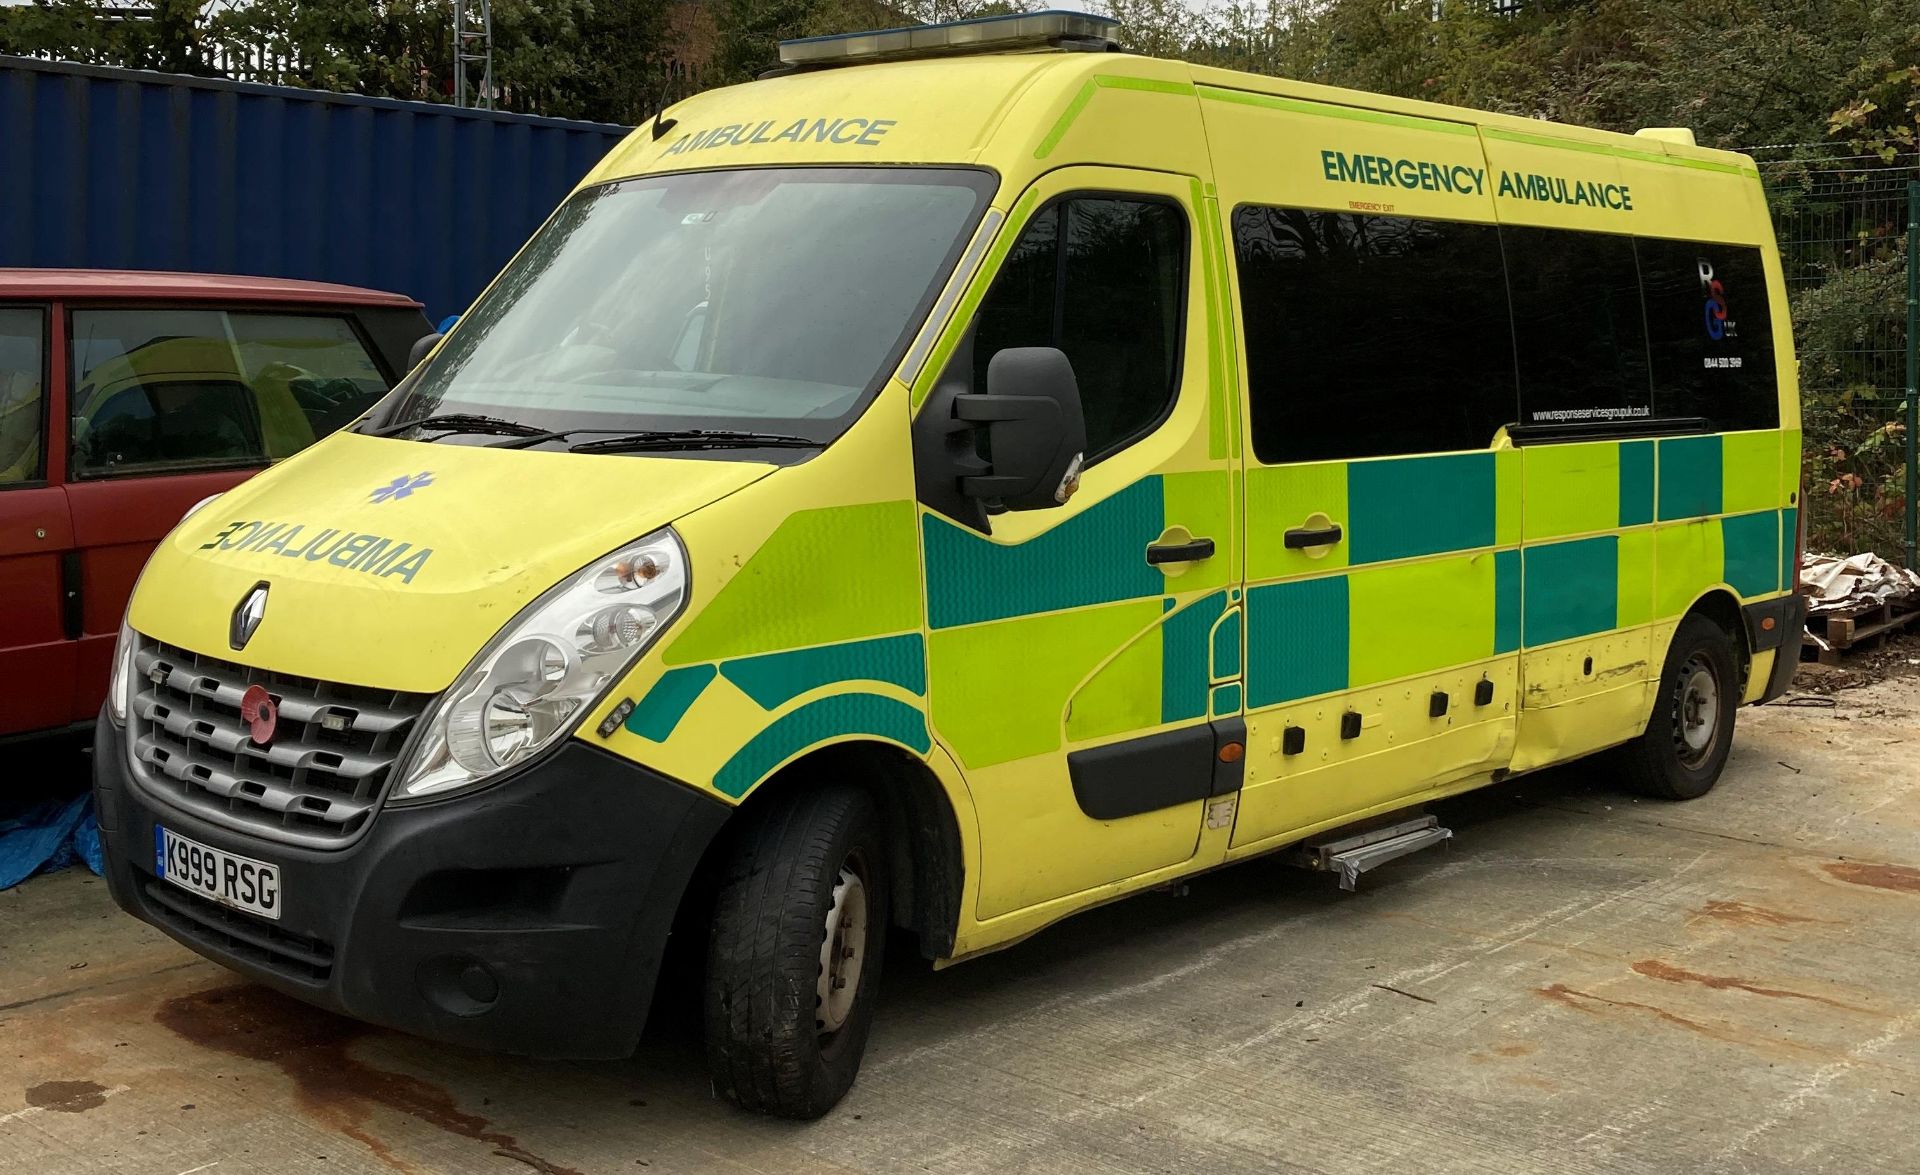 RENAULT MASTER 2.3 LM35 DCi AMBULANCE - Diesel - Yellow - complete with any contents. - Image 2 of 13